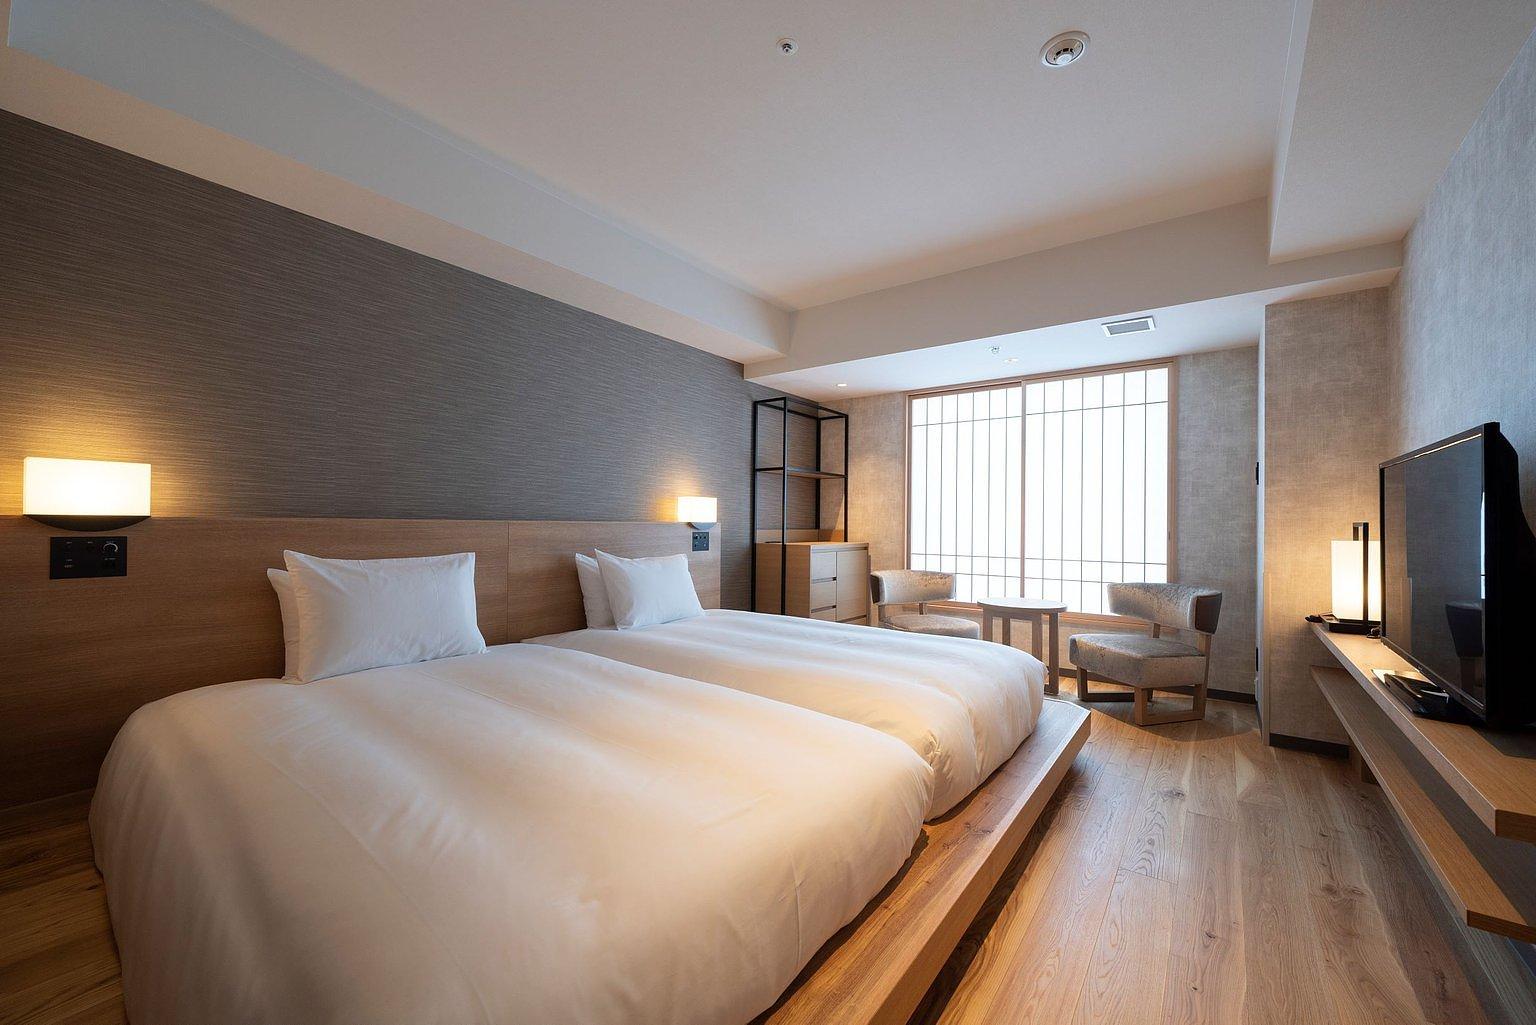 Wood Flat Twin（Promotion: make reservation 4/25-6/27） - 梅小路 Potel 京都* Special offer available booking until 6/27 